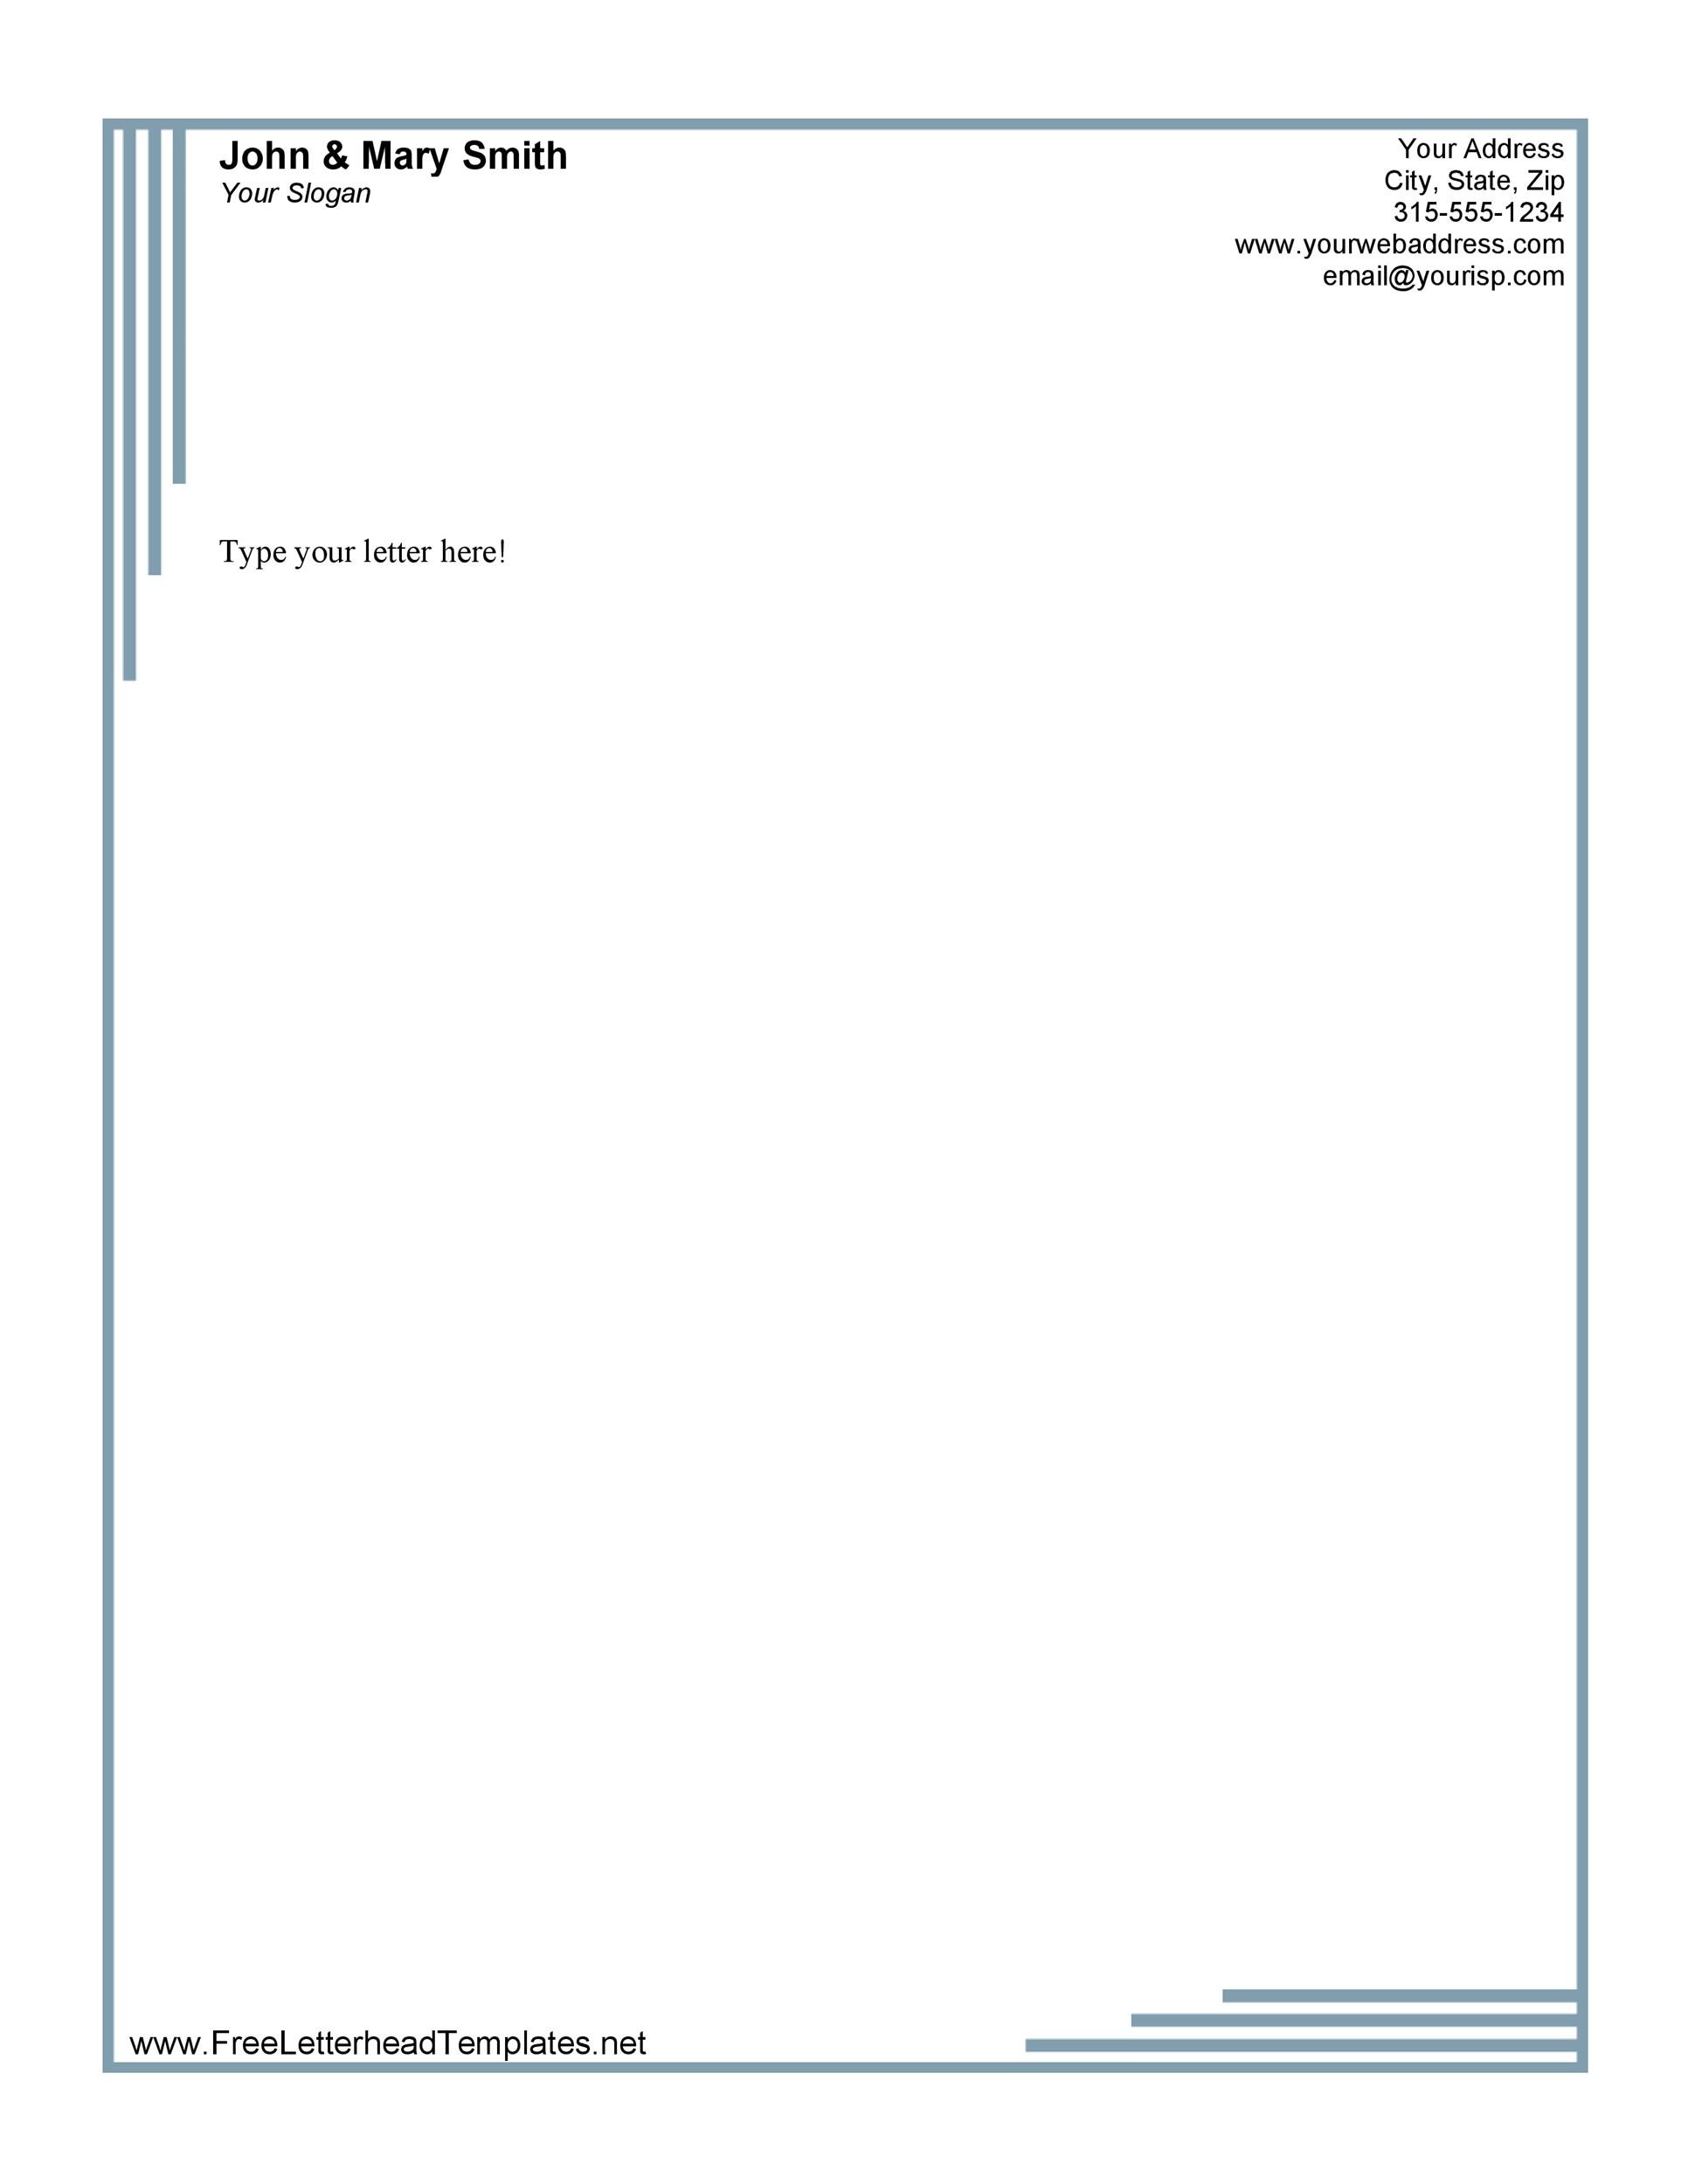 personal-letter-head-format-free-5-personal-letterhead-samples-in